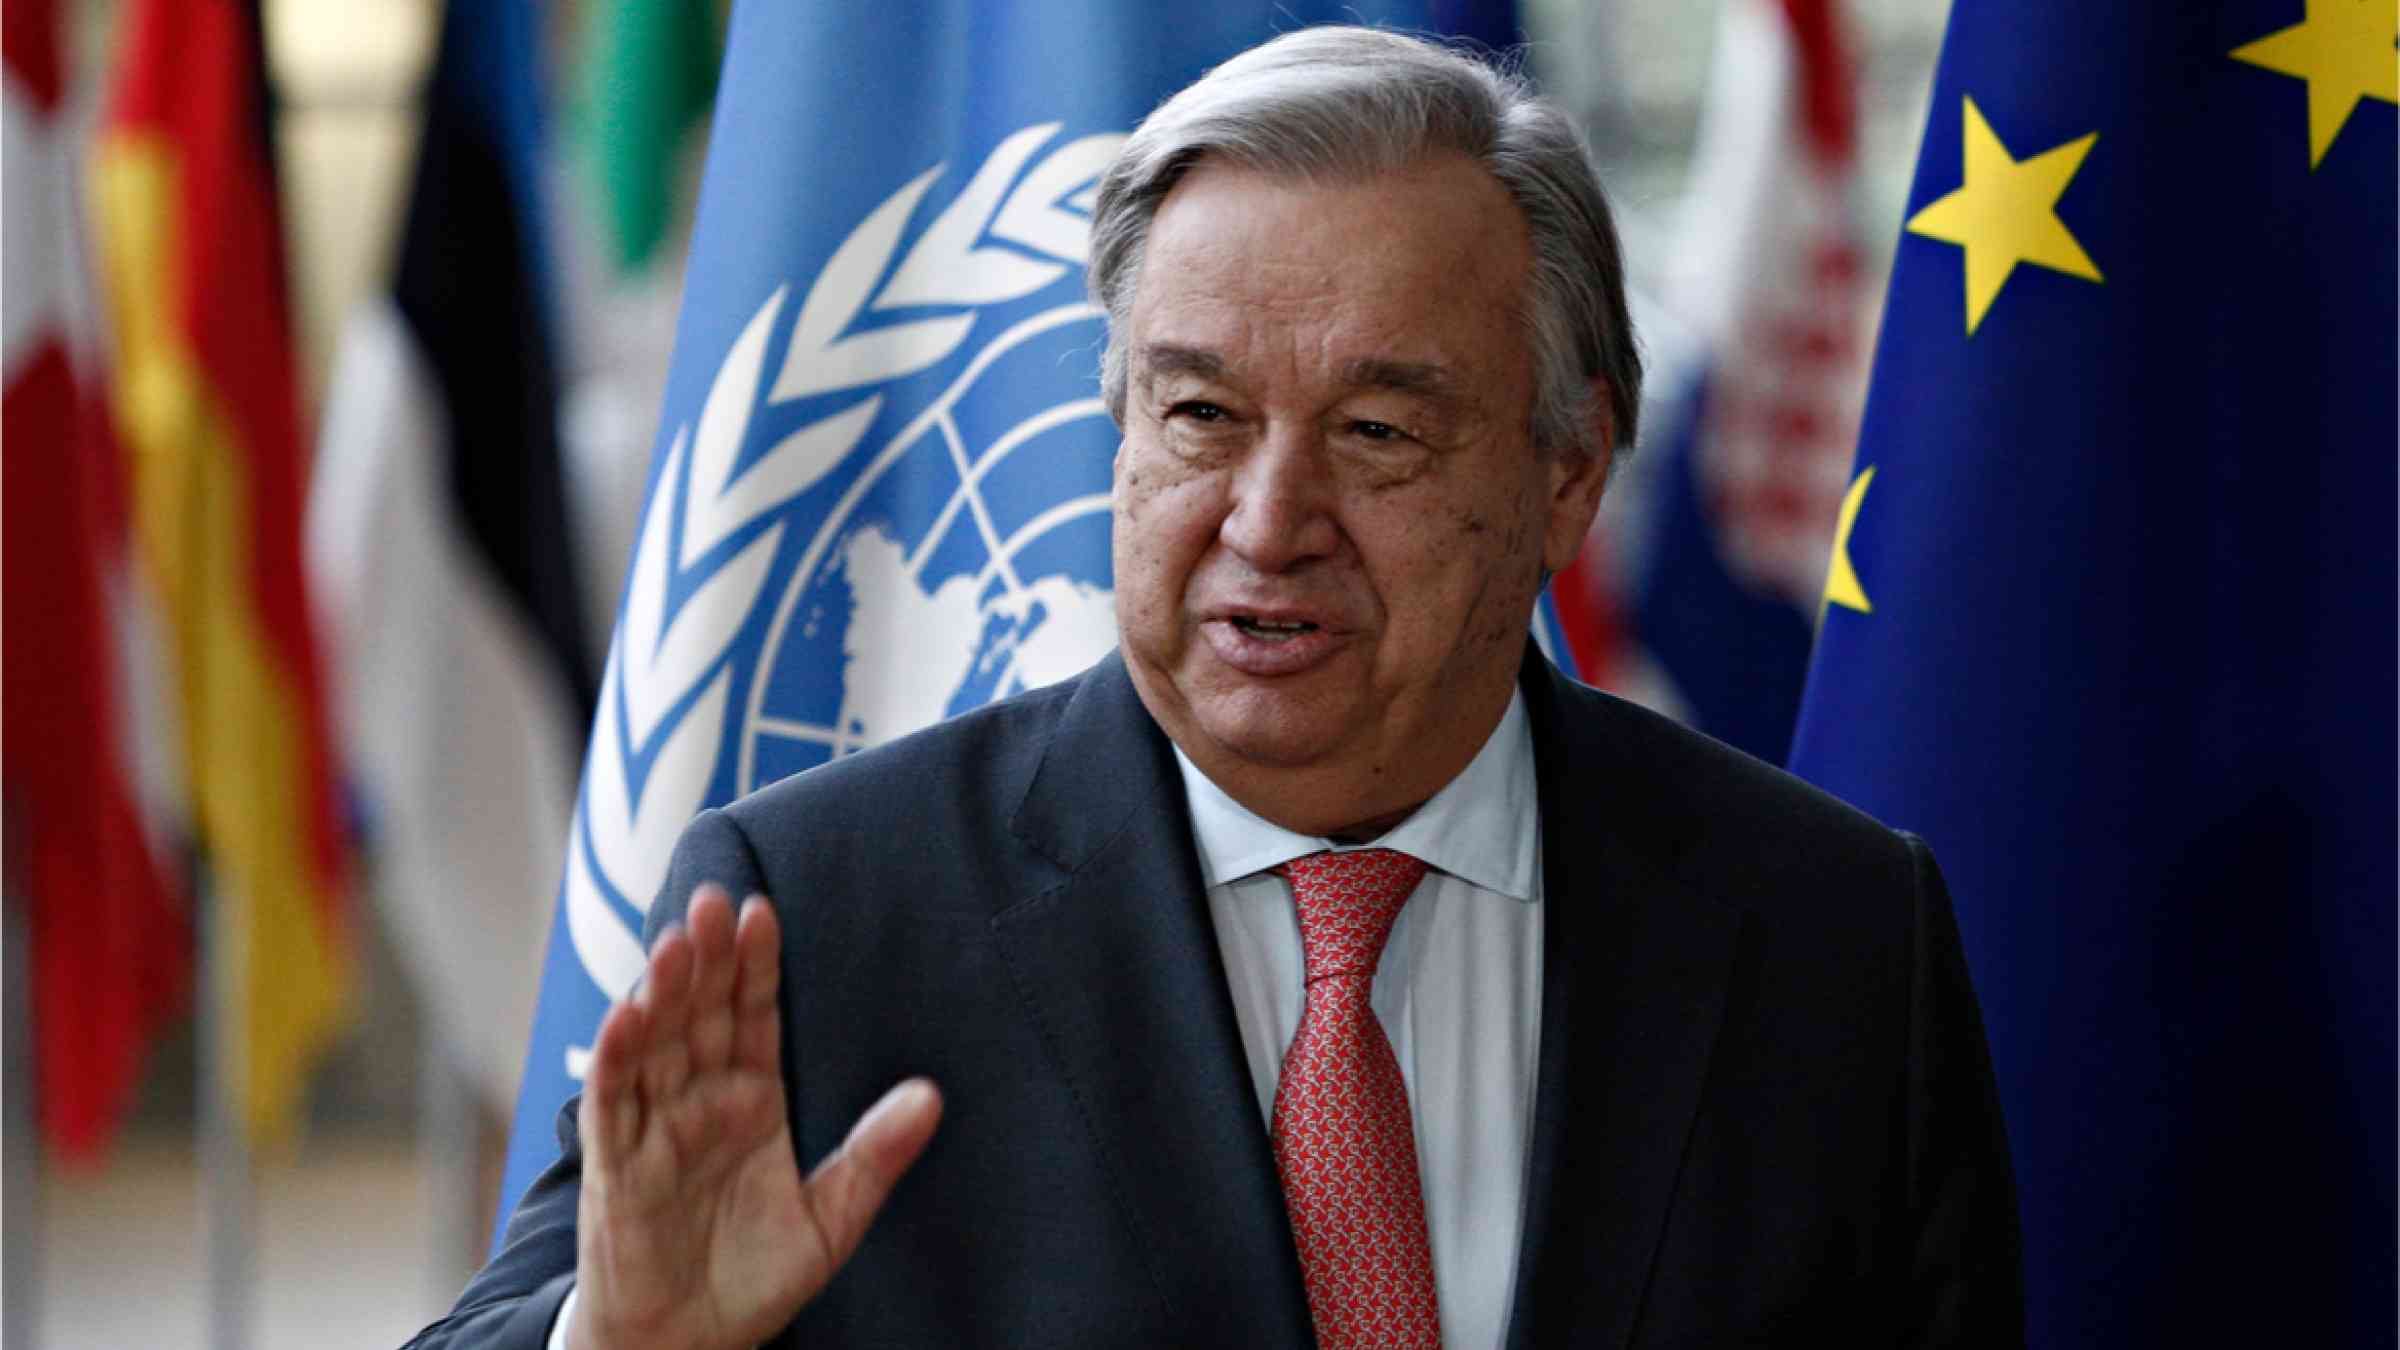 U.N. Secretary-General Antonio Guterres in front of the UN flag and national flags 